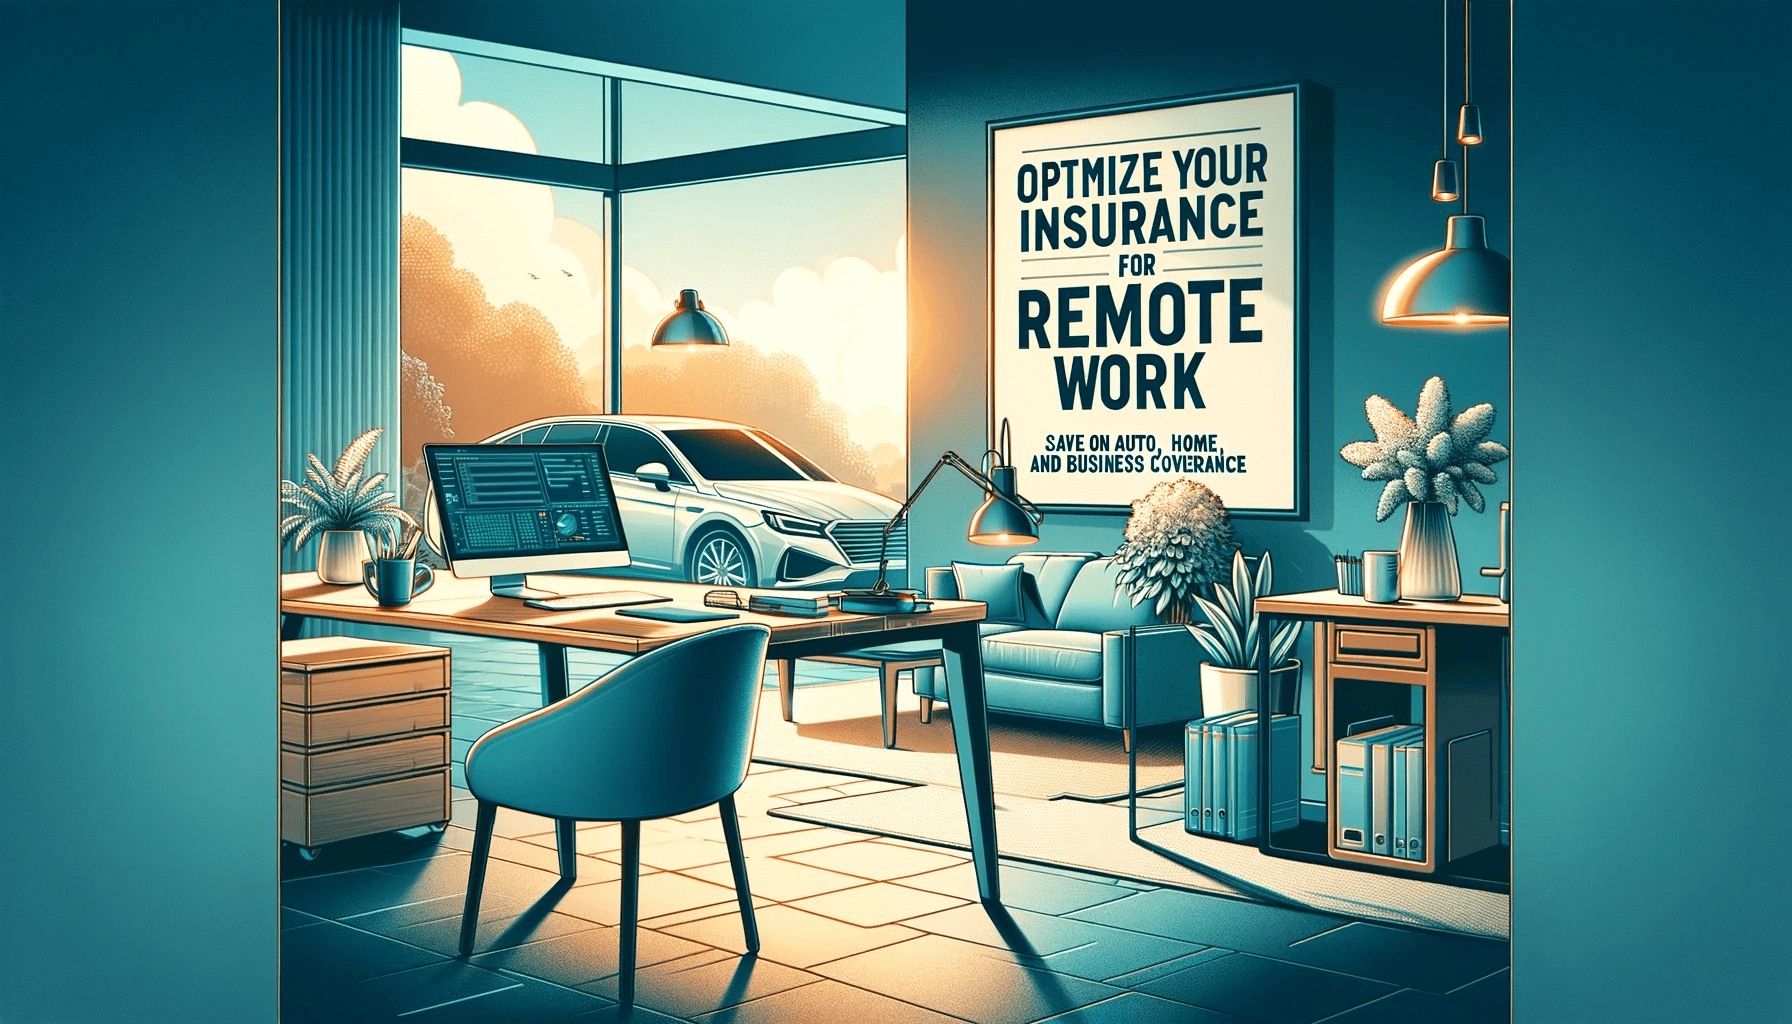 Modern home office setup with laptop and office equipment, a cozy living room in the background, and a parked car visible through a window.